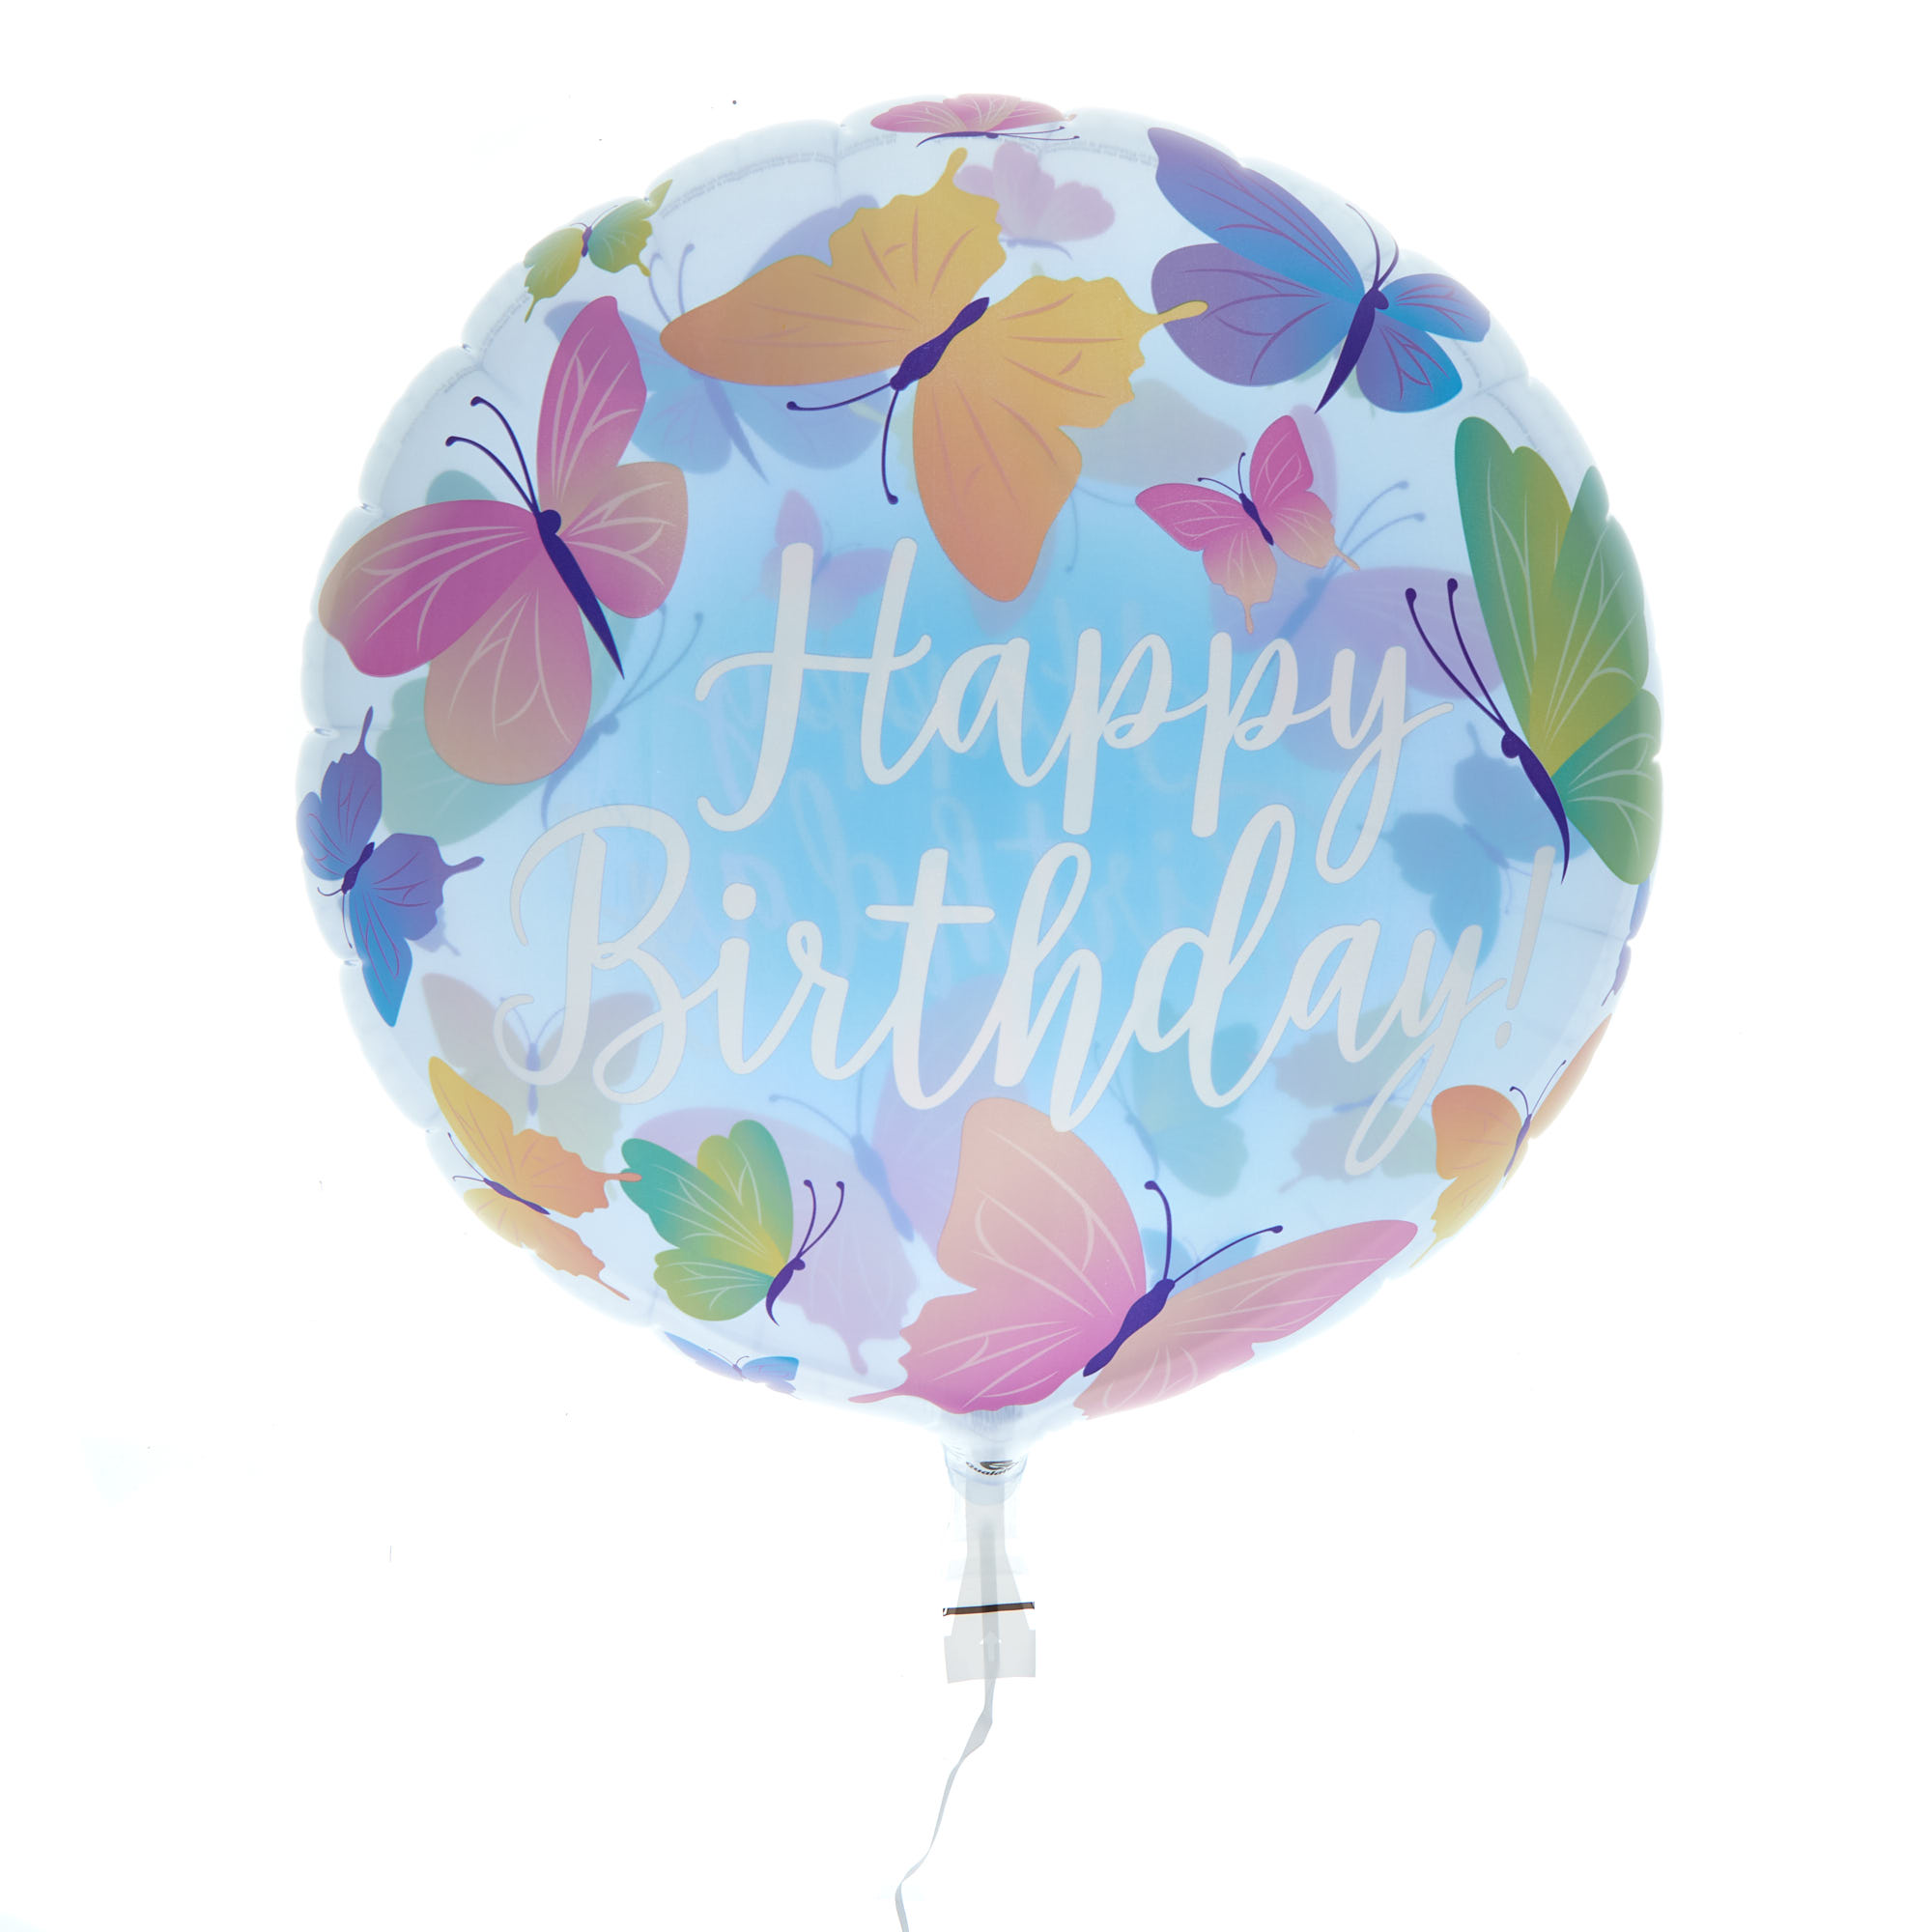 22-Inch Happy Birthday Butterflies Bubble Balloon - DELIVERED INFLATED!